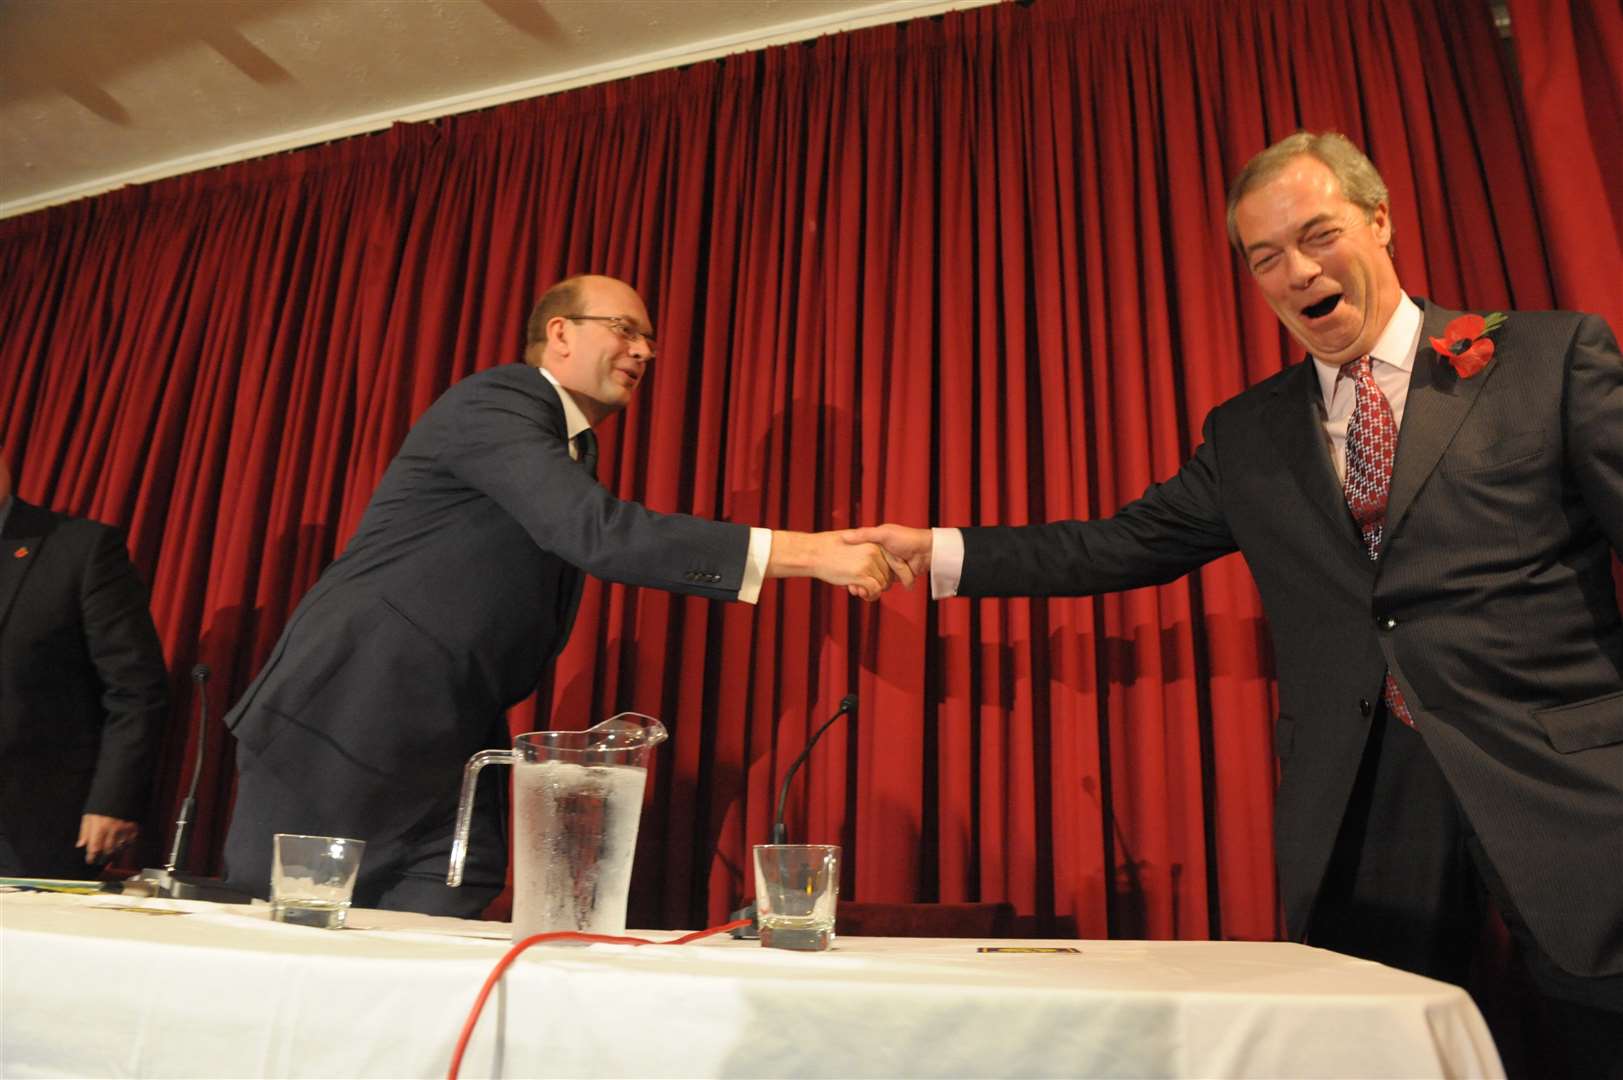 Ukip made a breakthrough in 2014 when former Rochester and Strood MP Mark Reckless, left, defected from the Tories, emboldening leader Nigel Farage